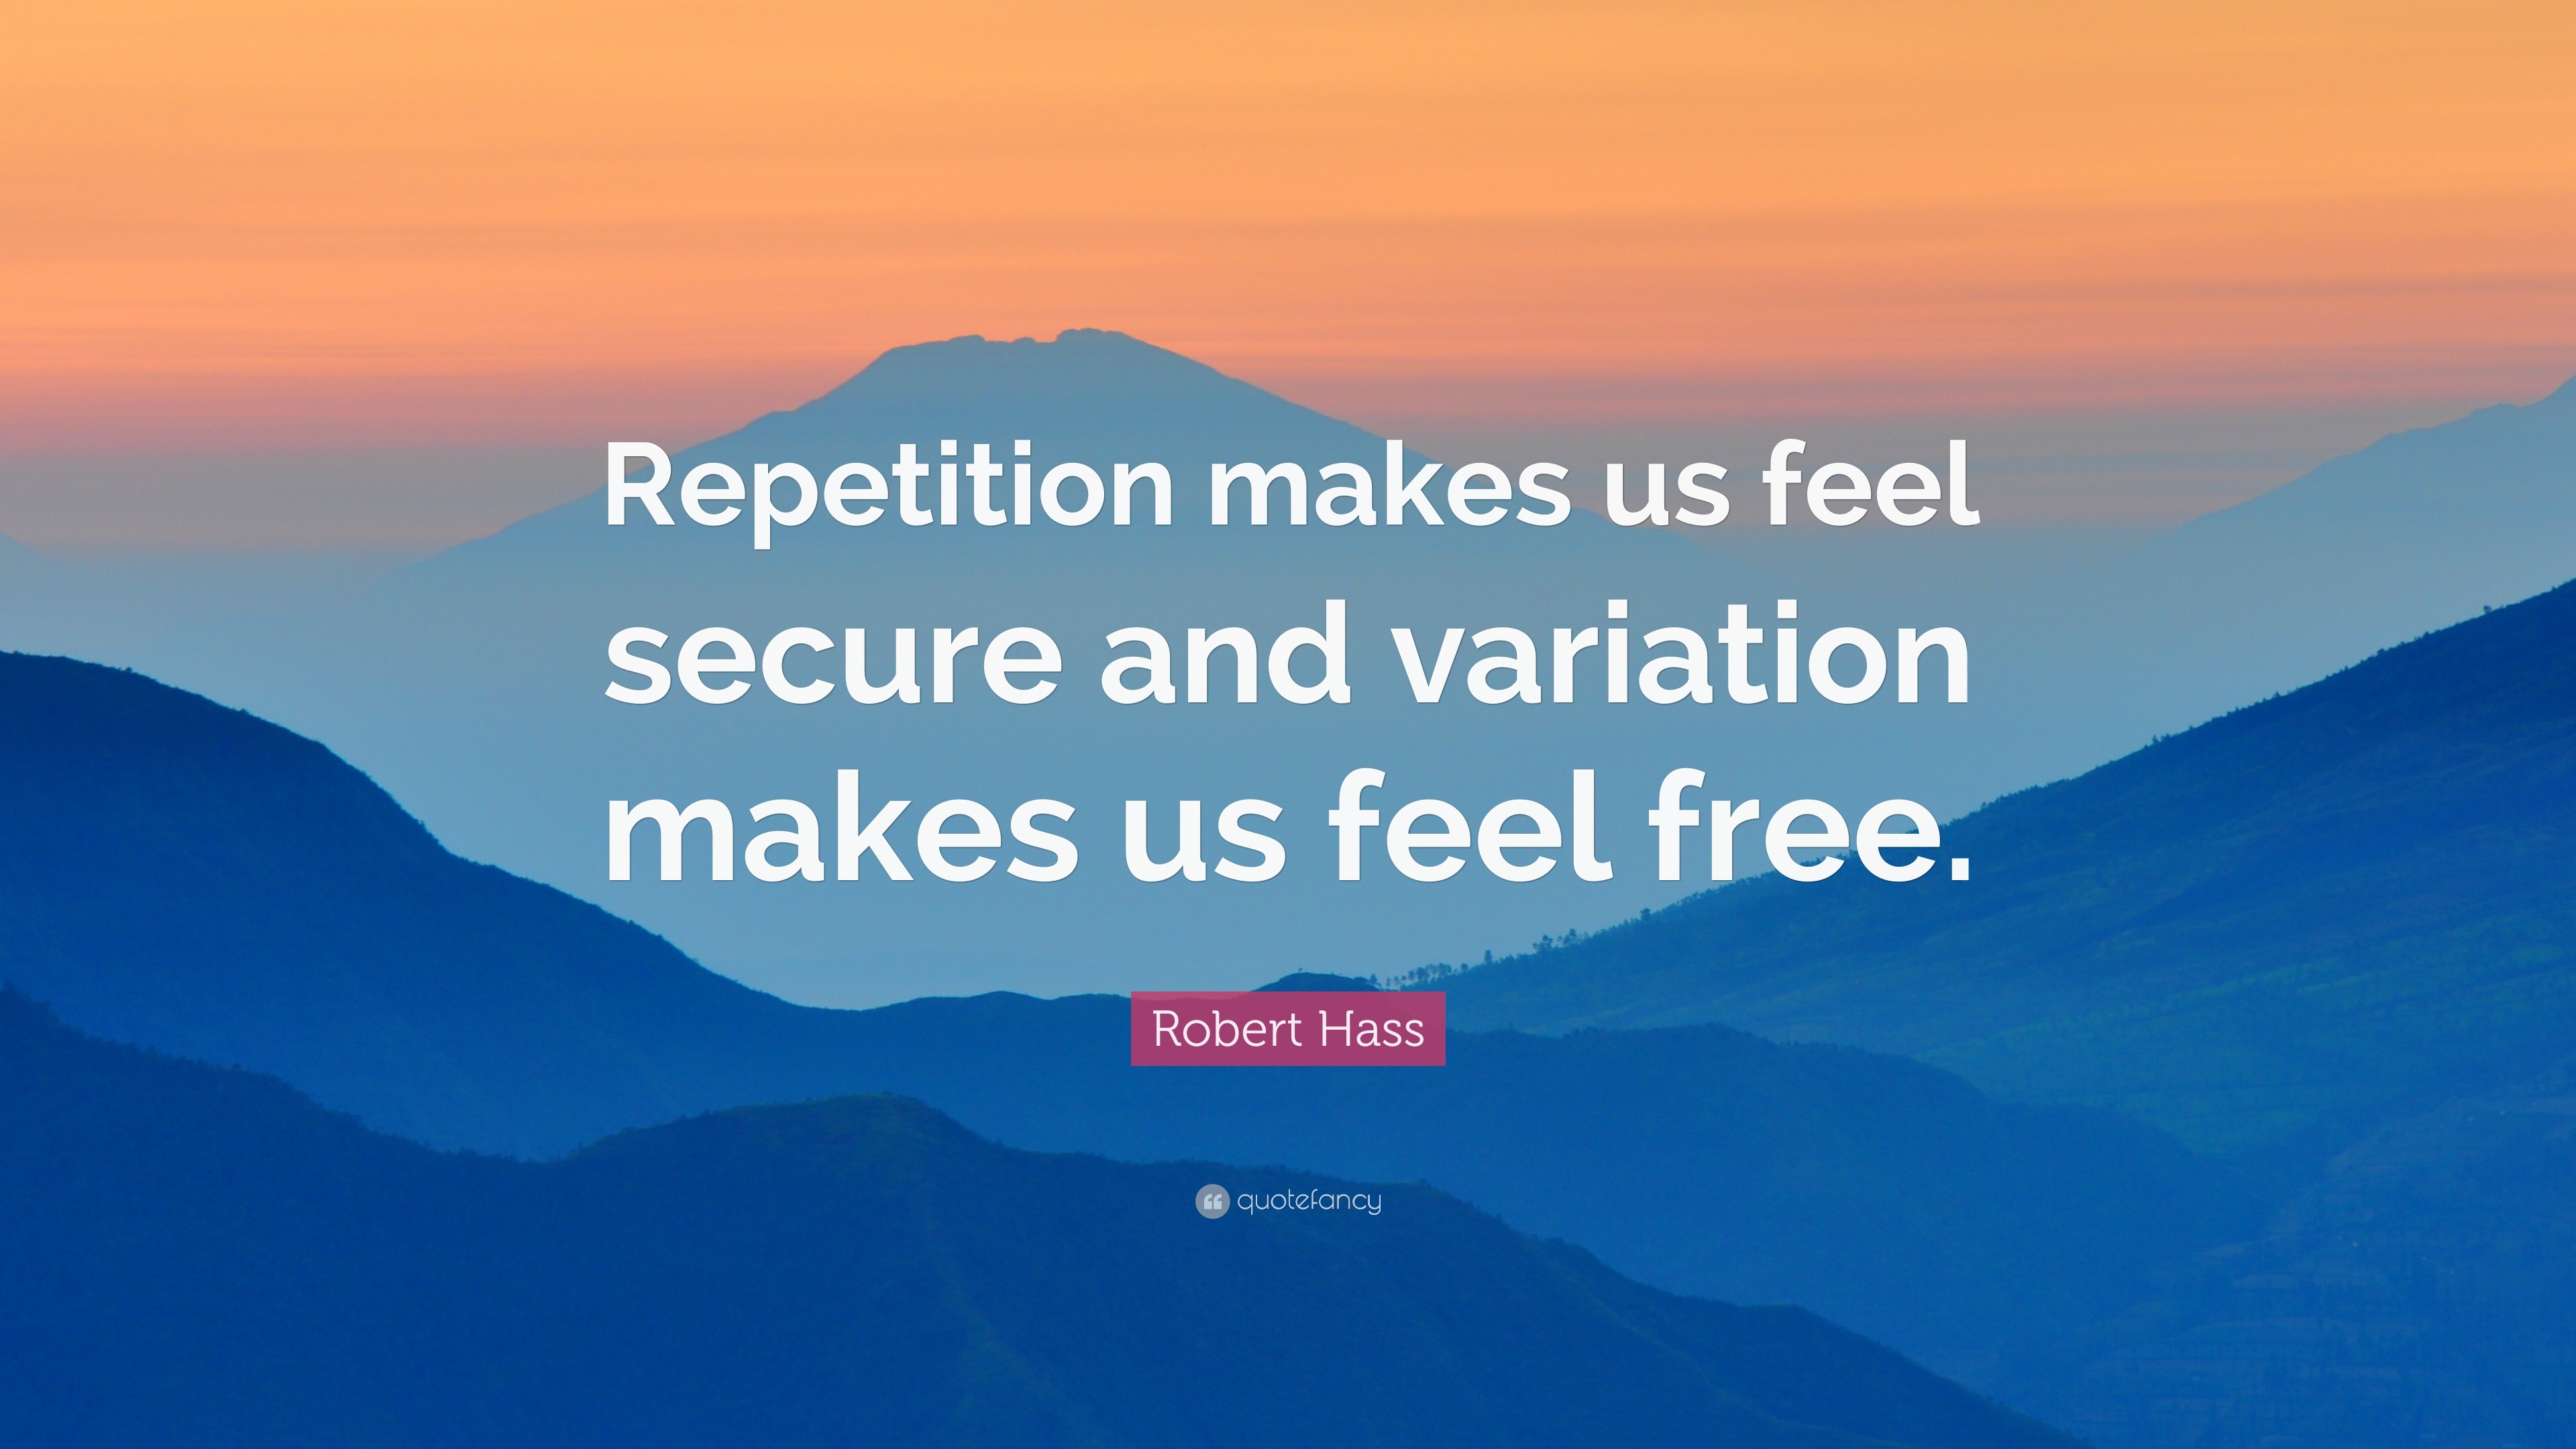 Robert Hass Quote: “Repetition makes us feel secure and variation makes ...